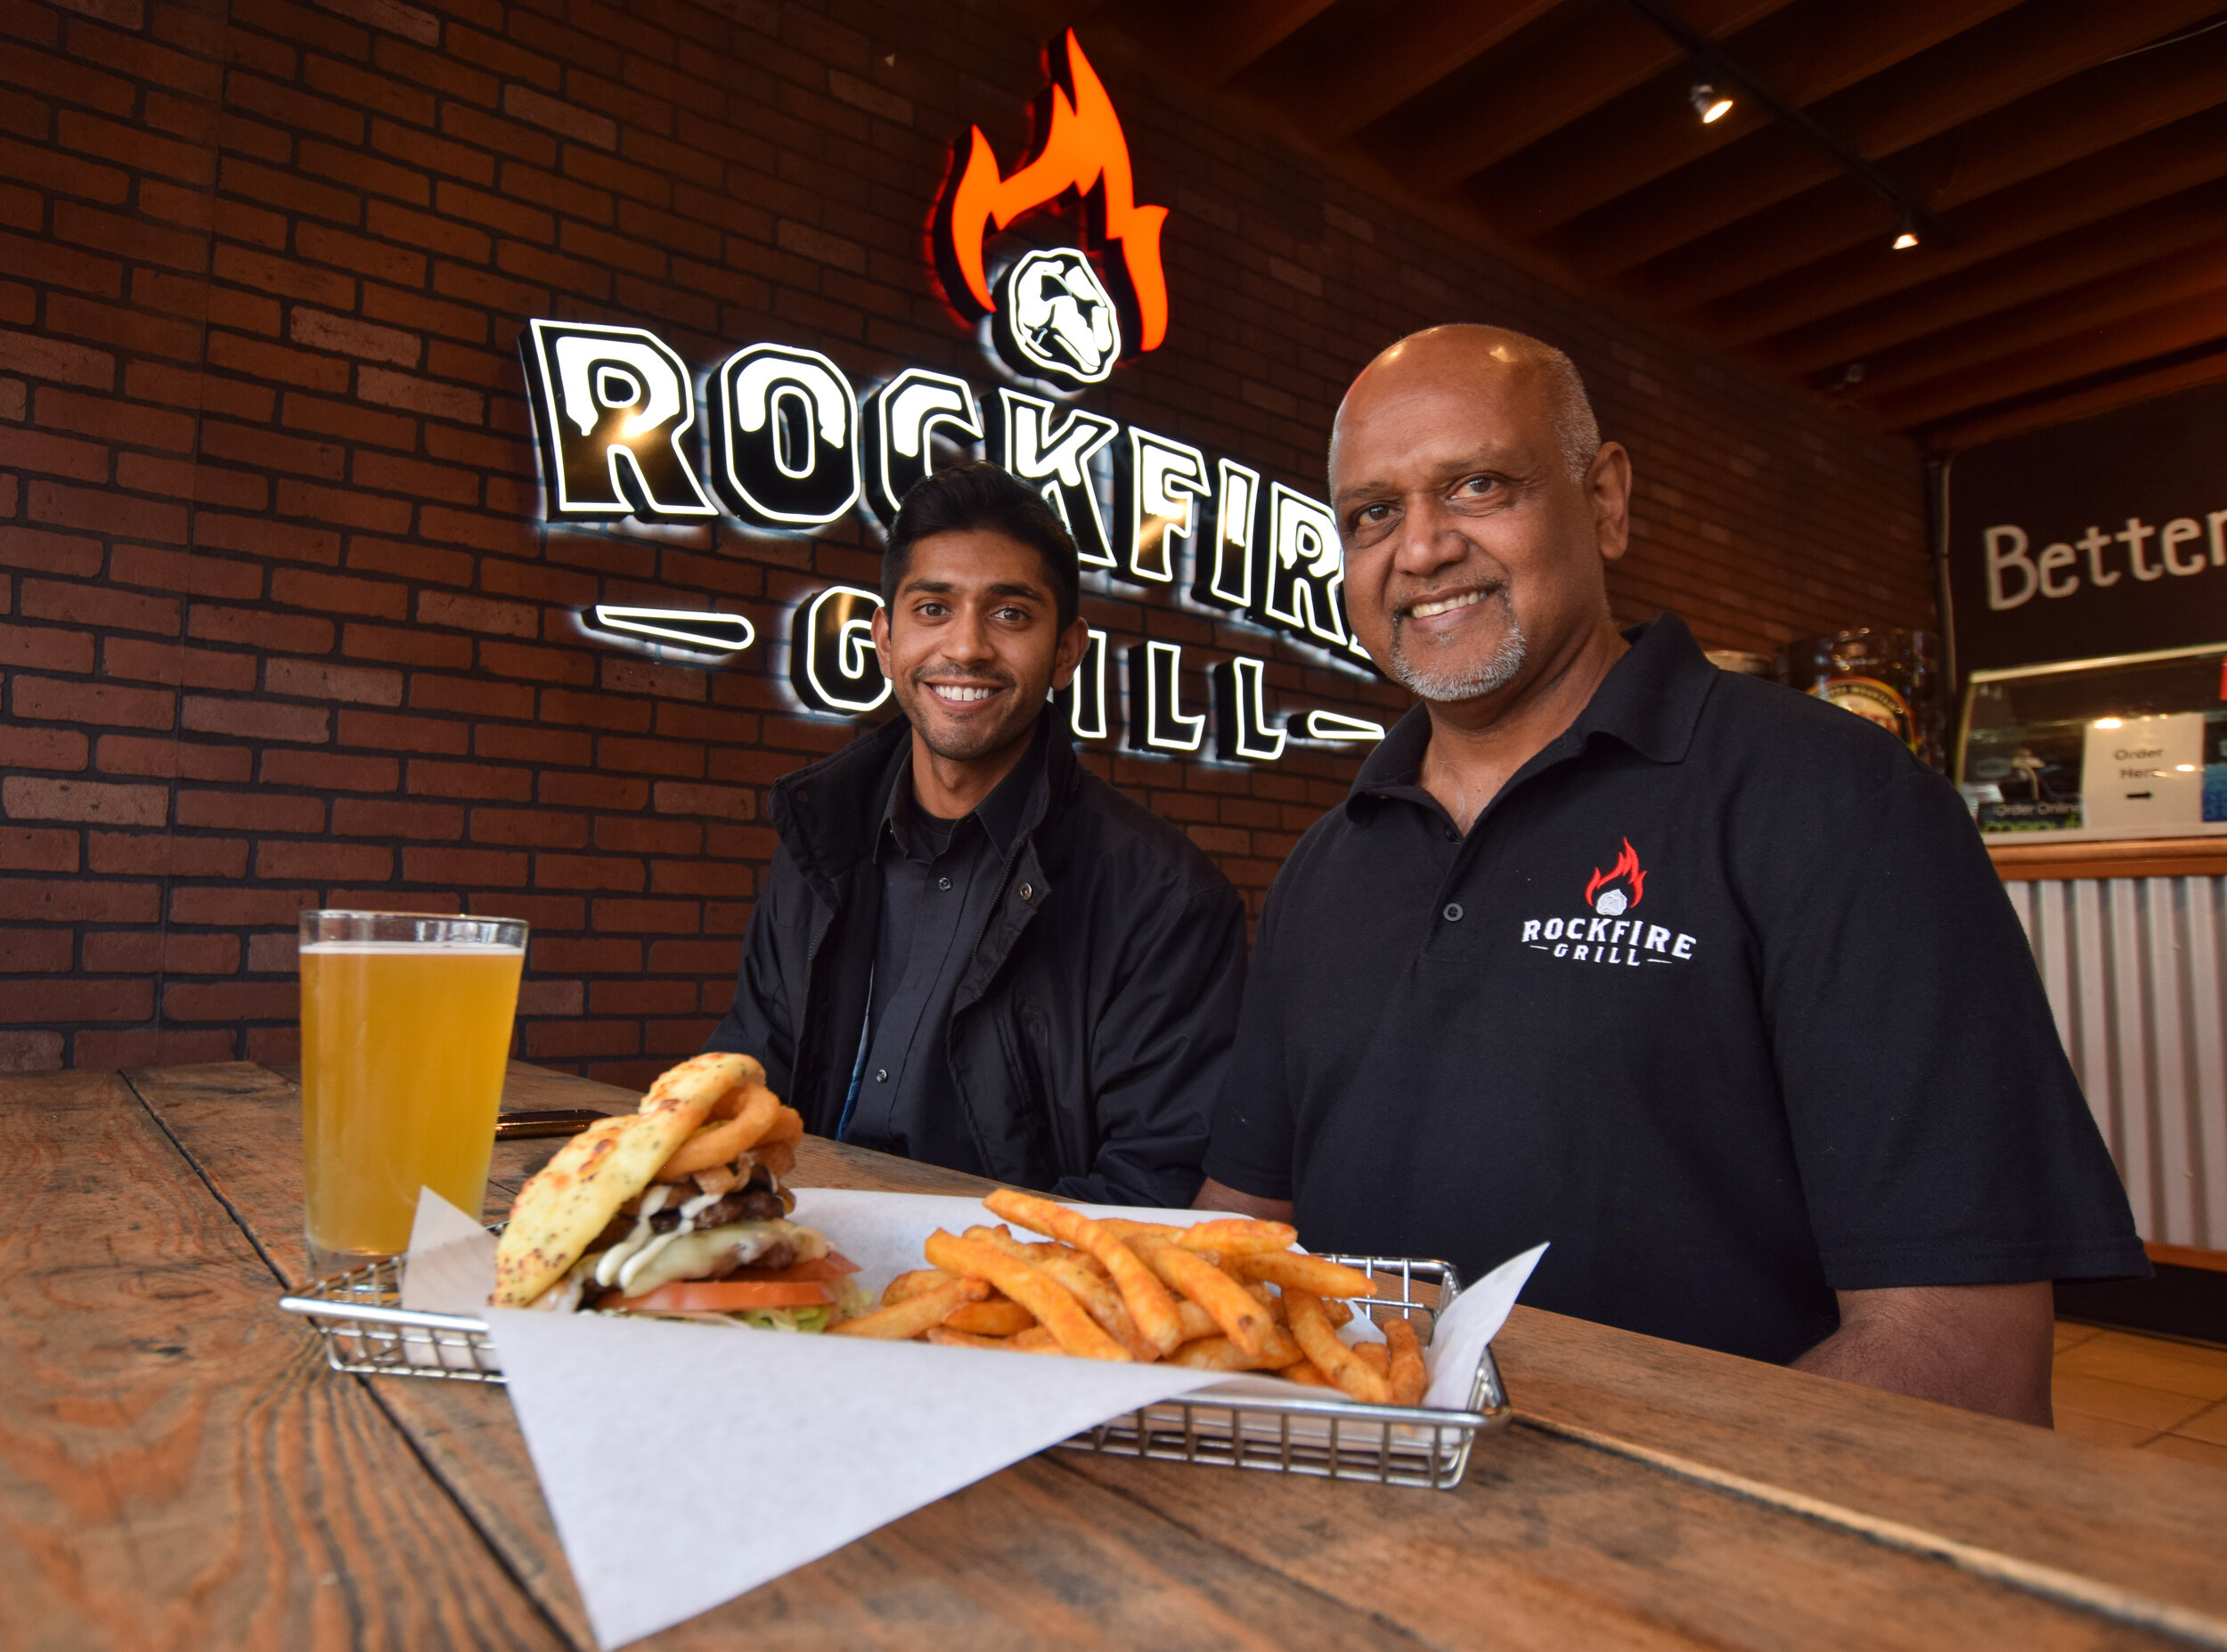  Rockfire Grill's Jai Syal (left), General Manager, and Raj Syal (right), Owner in their new location near the UCSB campus.  